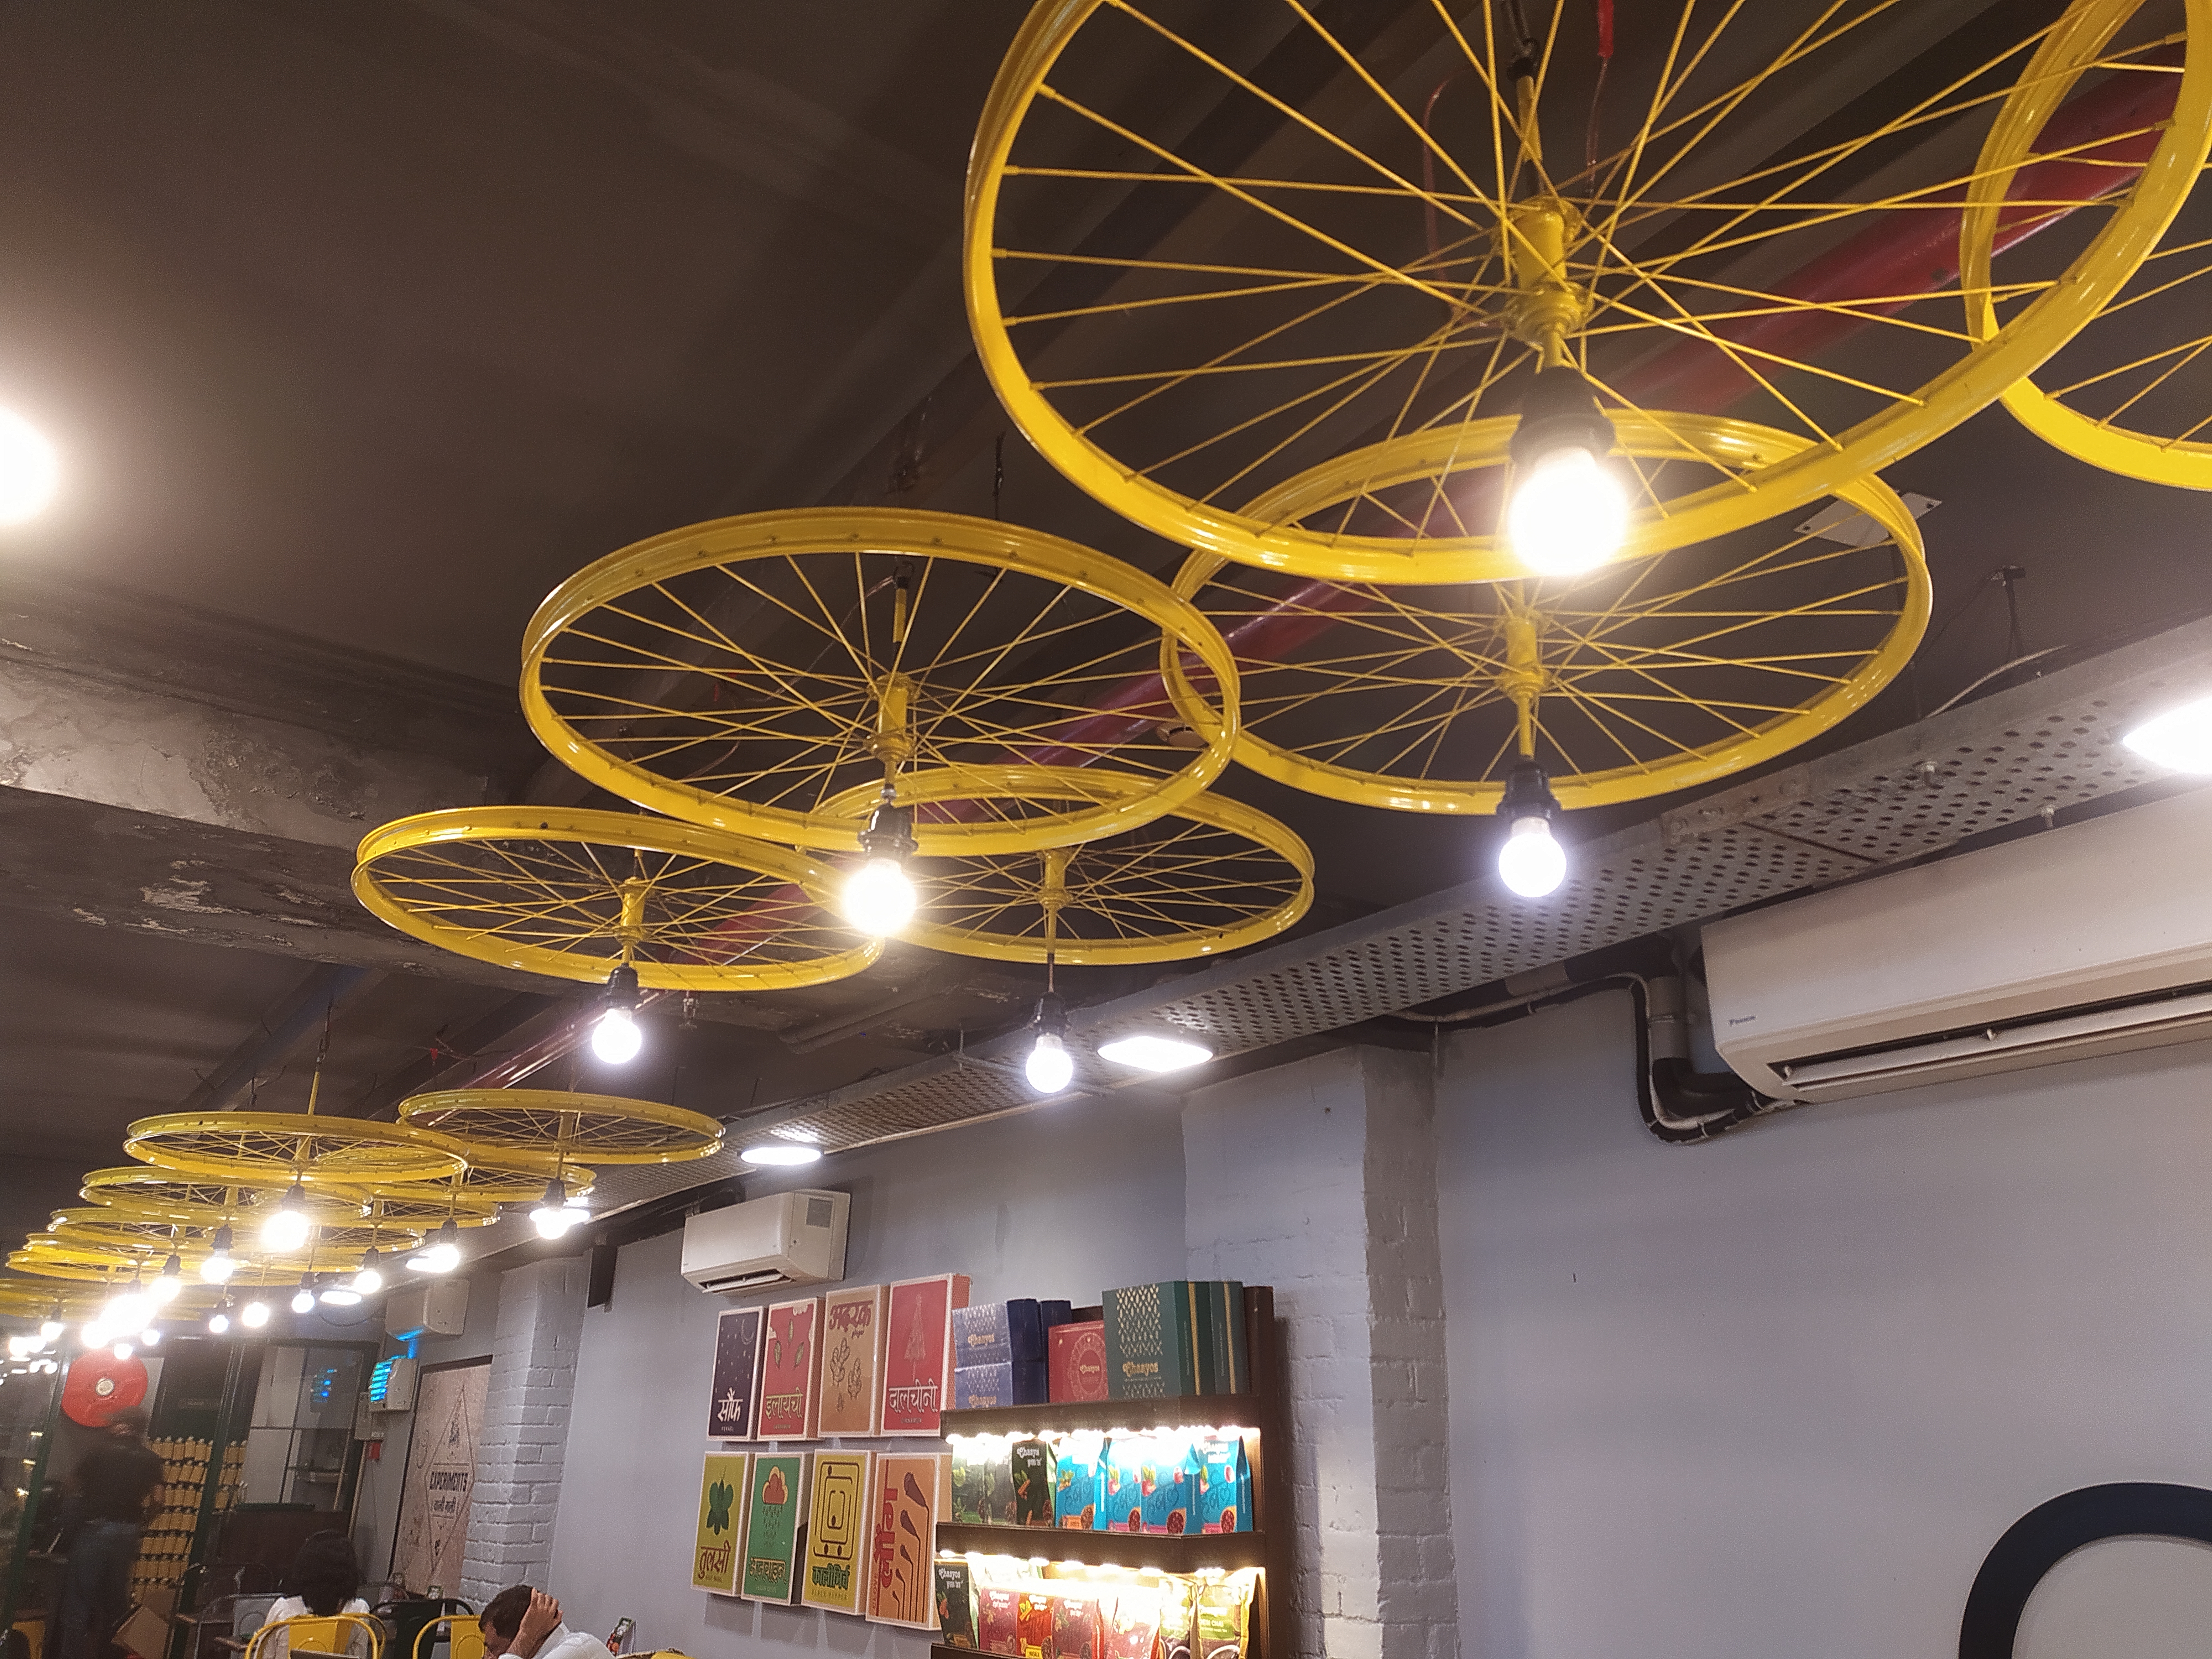 Photos and Videos of Chaayos Cafe at Connaught Place, New Delhi